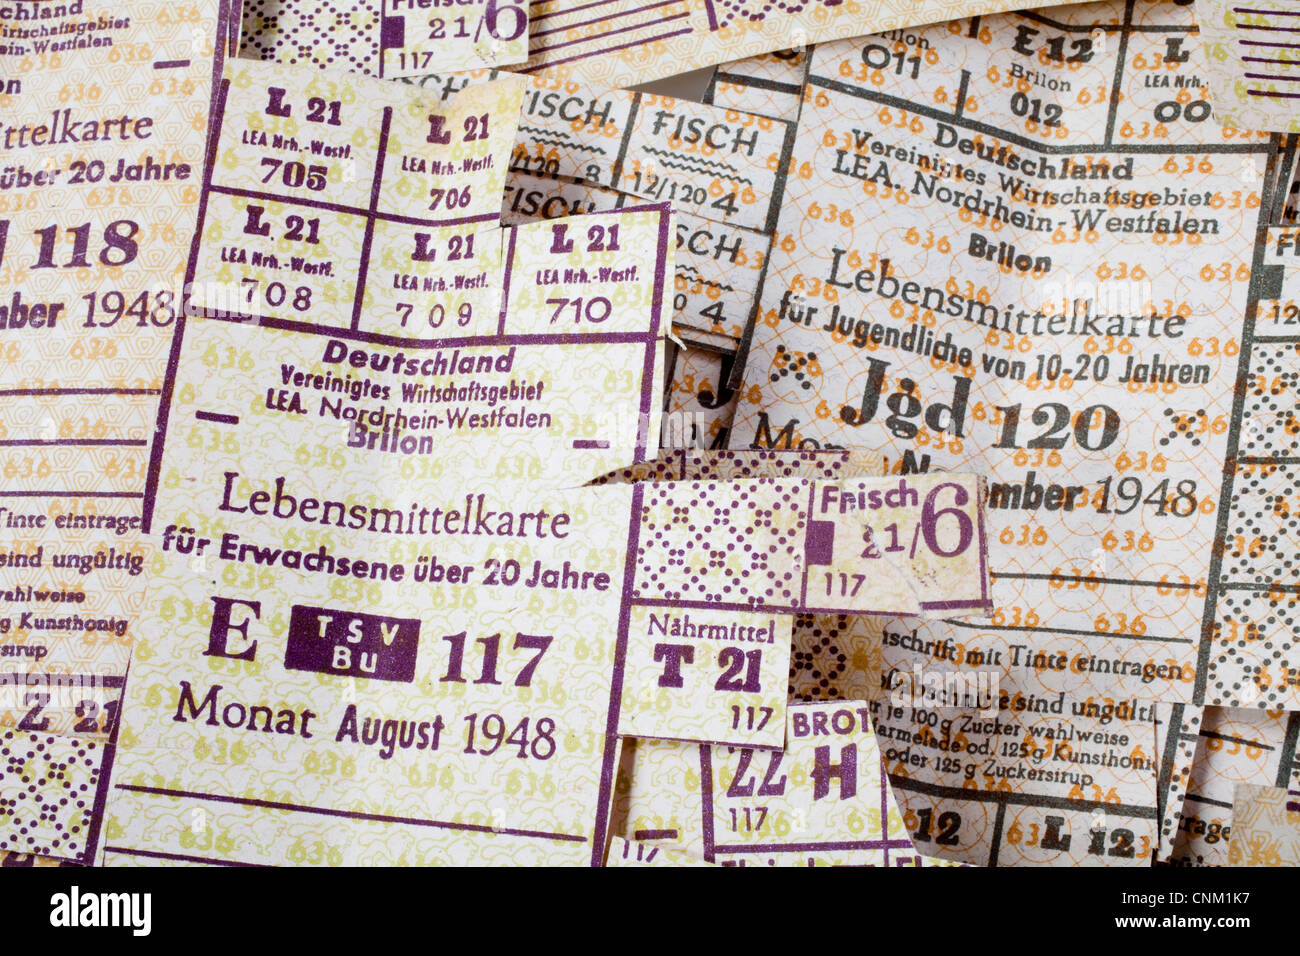 Coupon, ration card for food, Third Reich food ration card, 1948, Germany, Europe Stock Photo